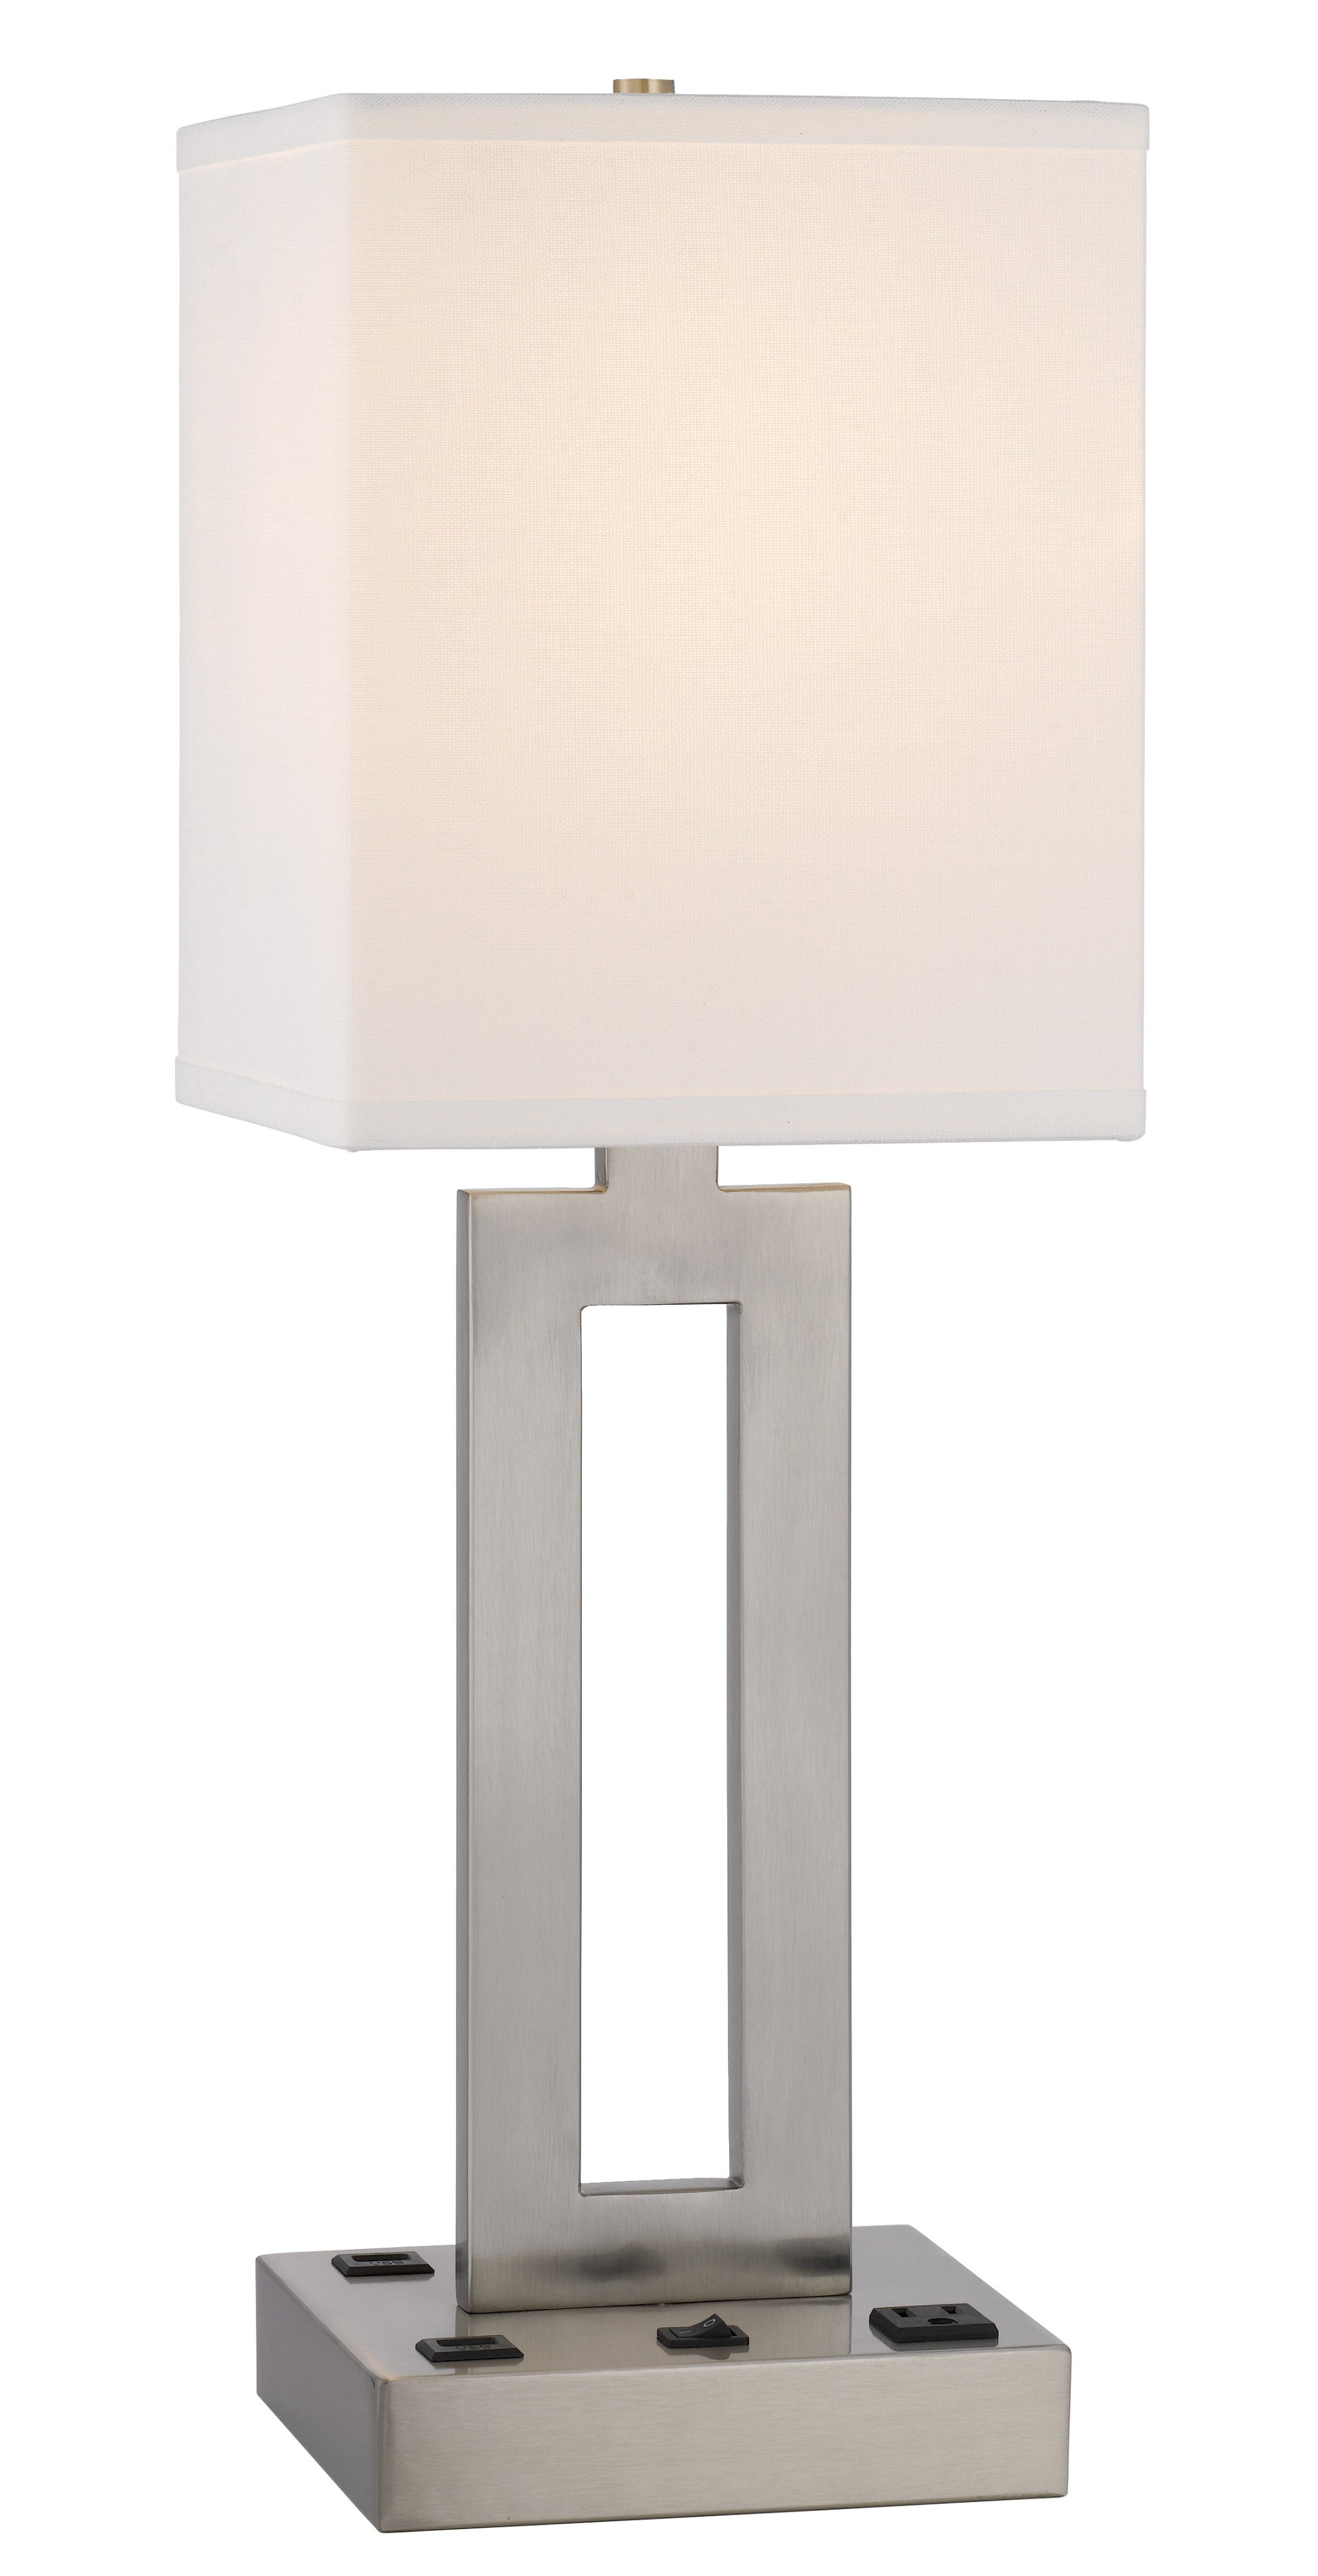 24" Nickel Metal Desk Usb Table Lamp With White Drum Shade